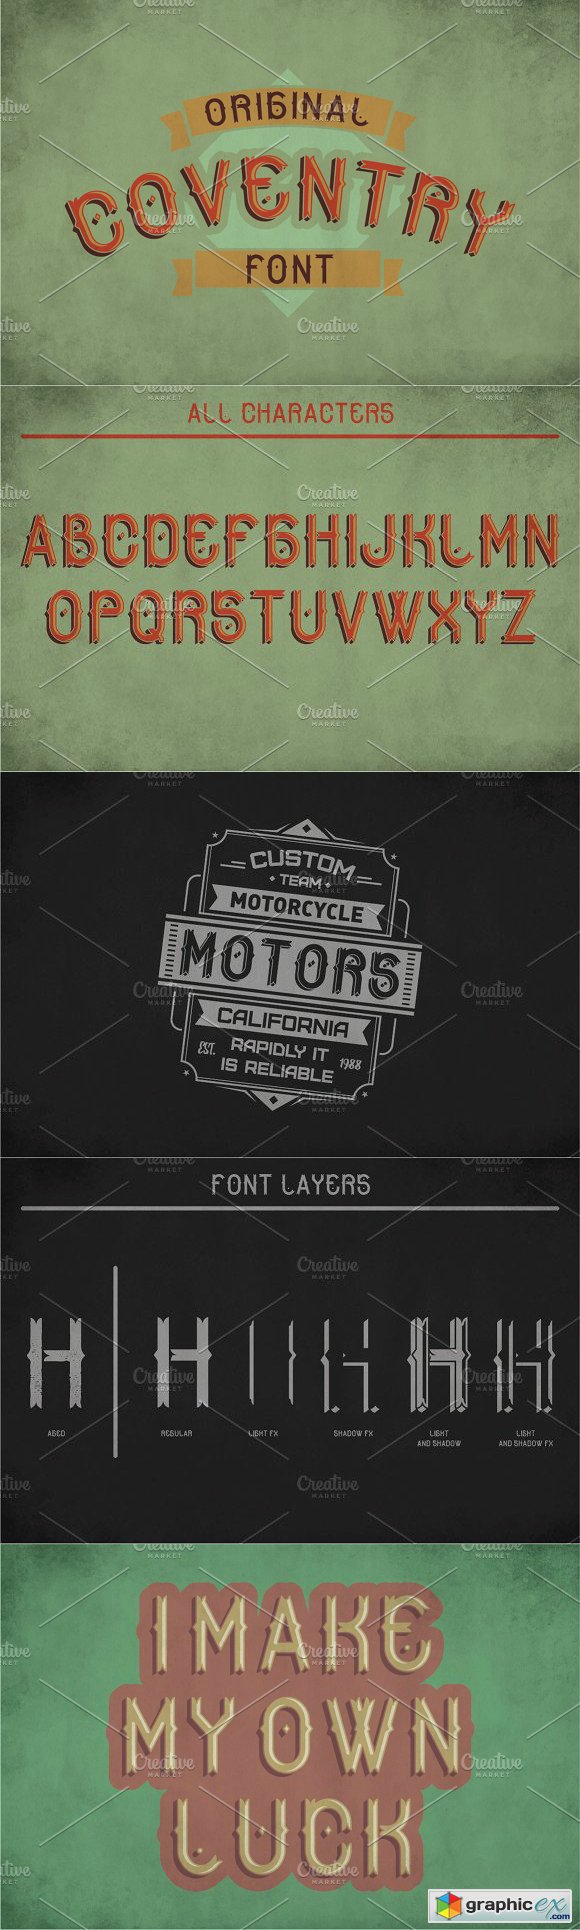 Coventry Vintage Label Typeface Fonts